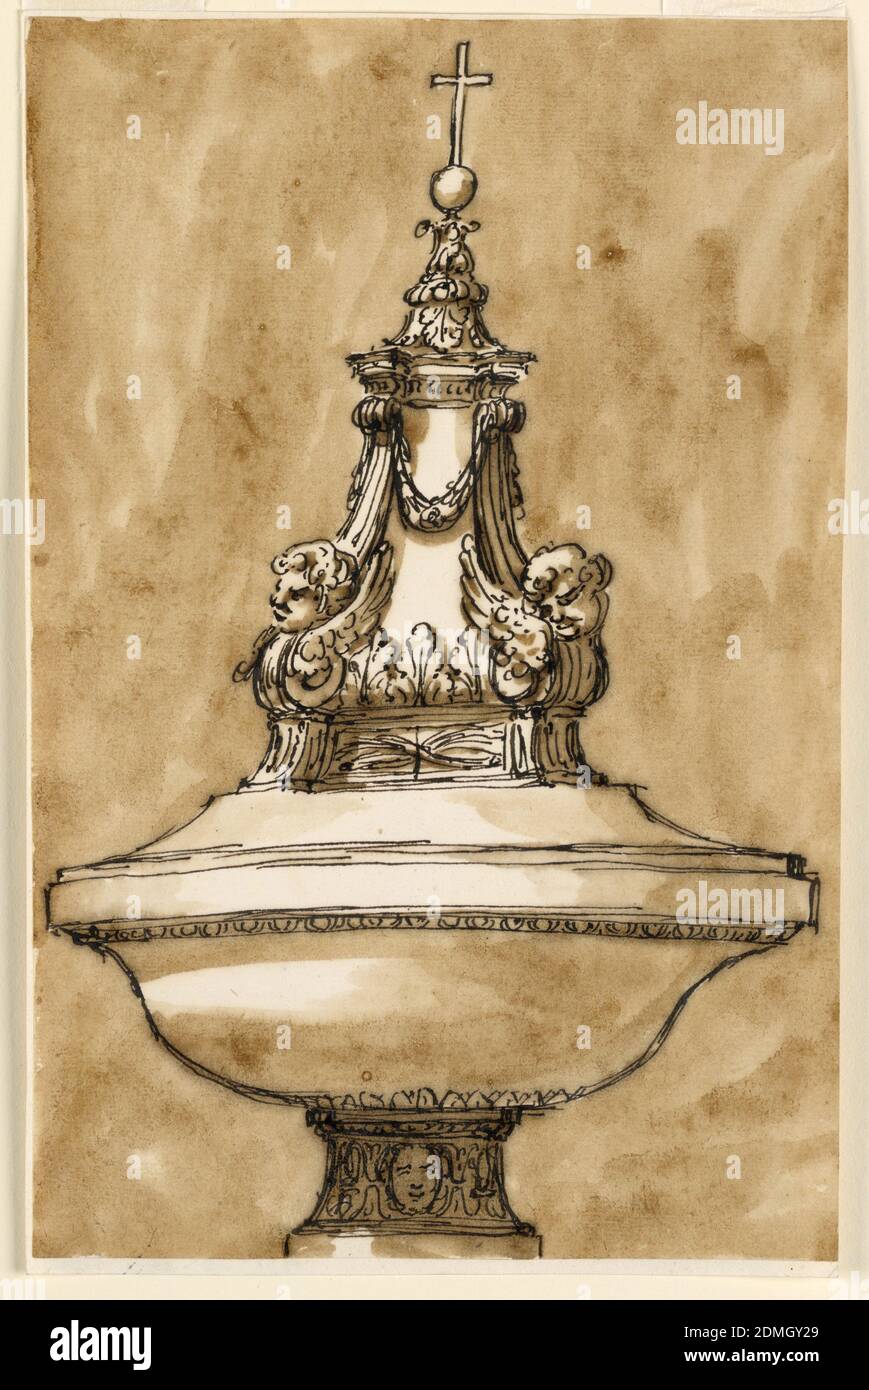 Baptismal Font, Pen and brown ink, brush and brown wash, on off-white laid paper, lined, Sketch of a decorative architectural element, consisting of a double-convex bowl on a foot with a carved mask, supporting a pyramidal arrangement of a pediment-like form below acanthus, winged cherub heads, and garlands, below the finial orb and cross., Italy, late 18th century, architecture, Drawing Stock Photo